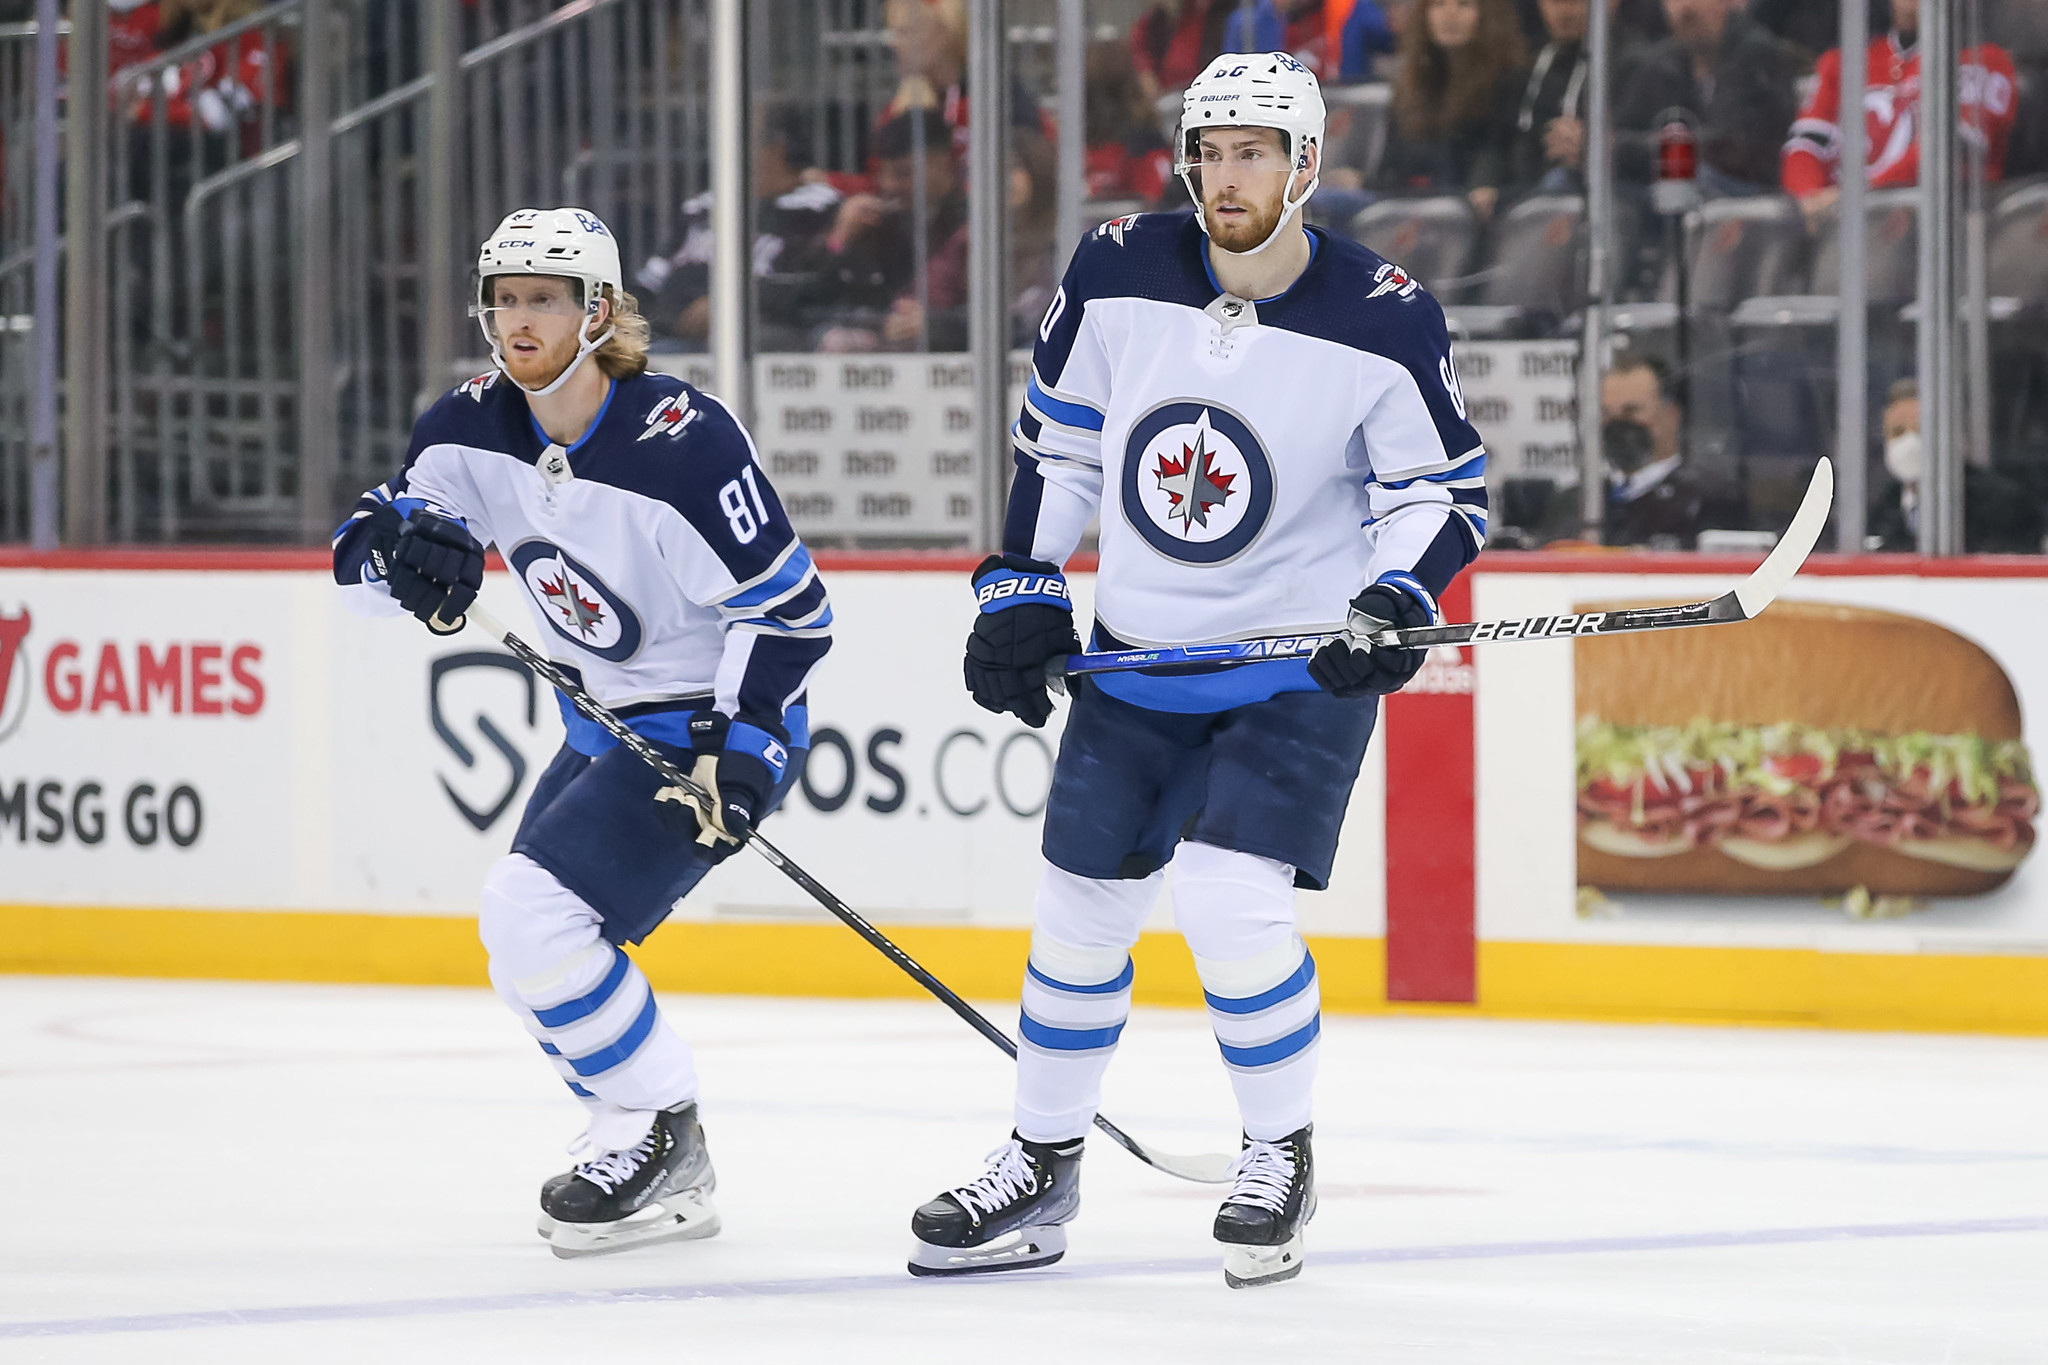 Winnipeg Jets have scored at drafting core players for future success